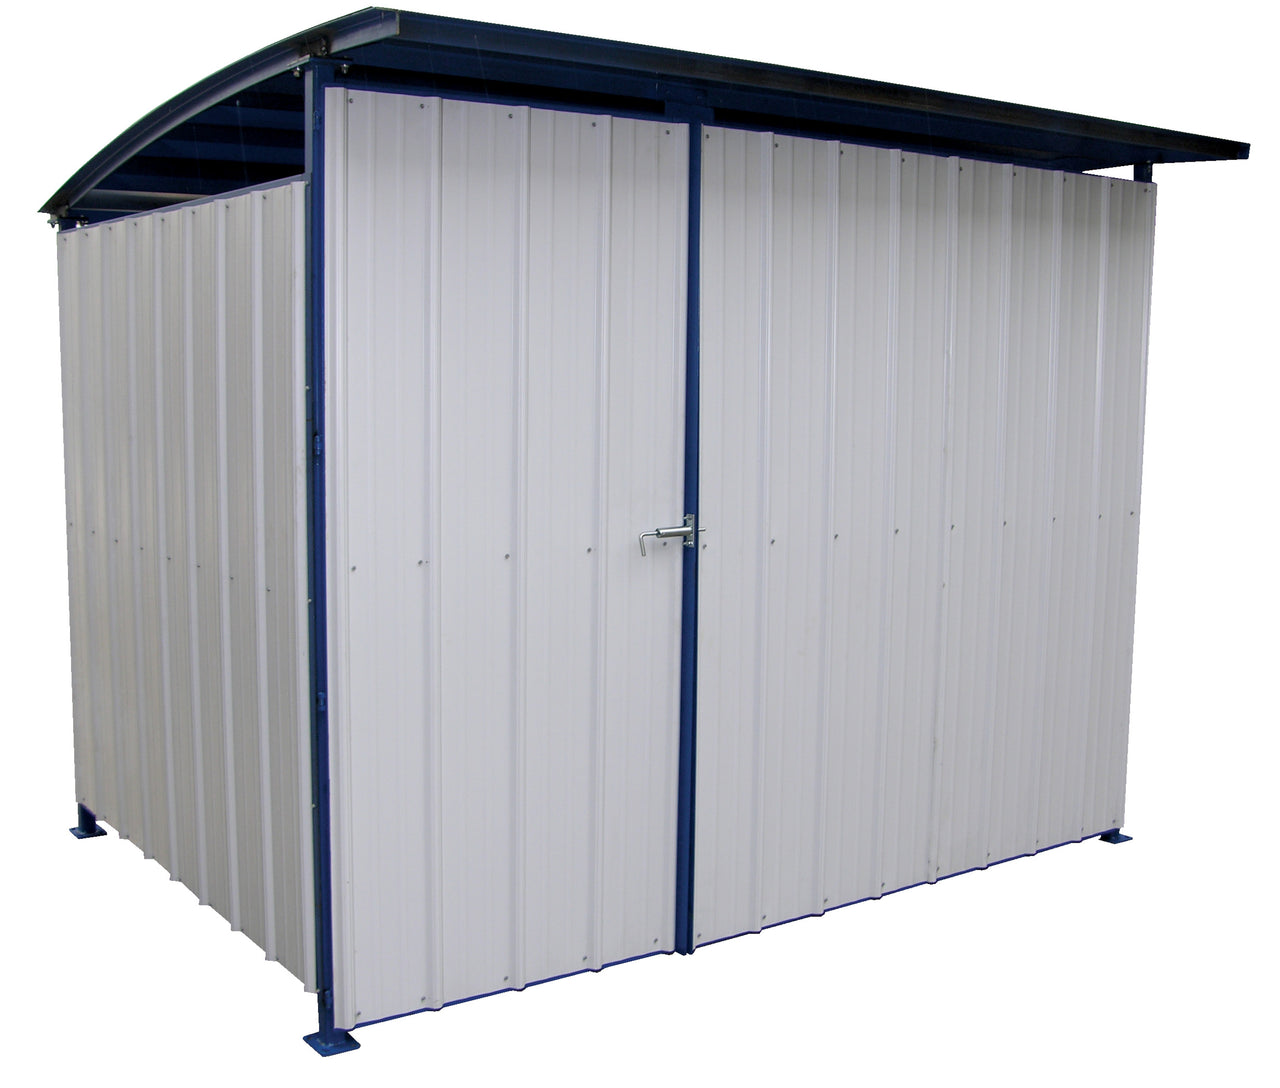 Multi-Duty Shed - With Front Doors